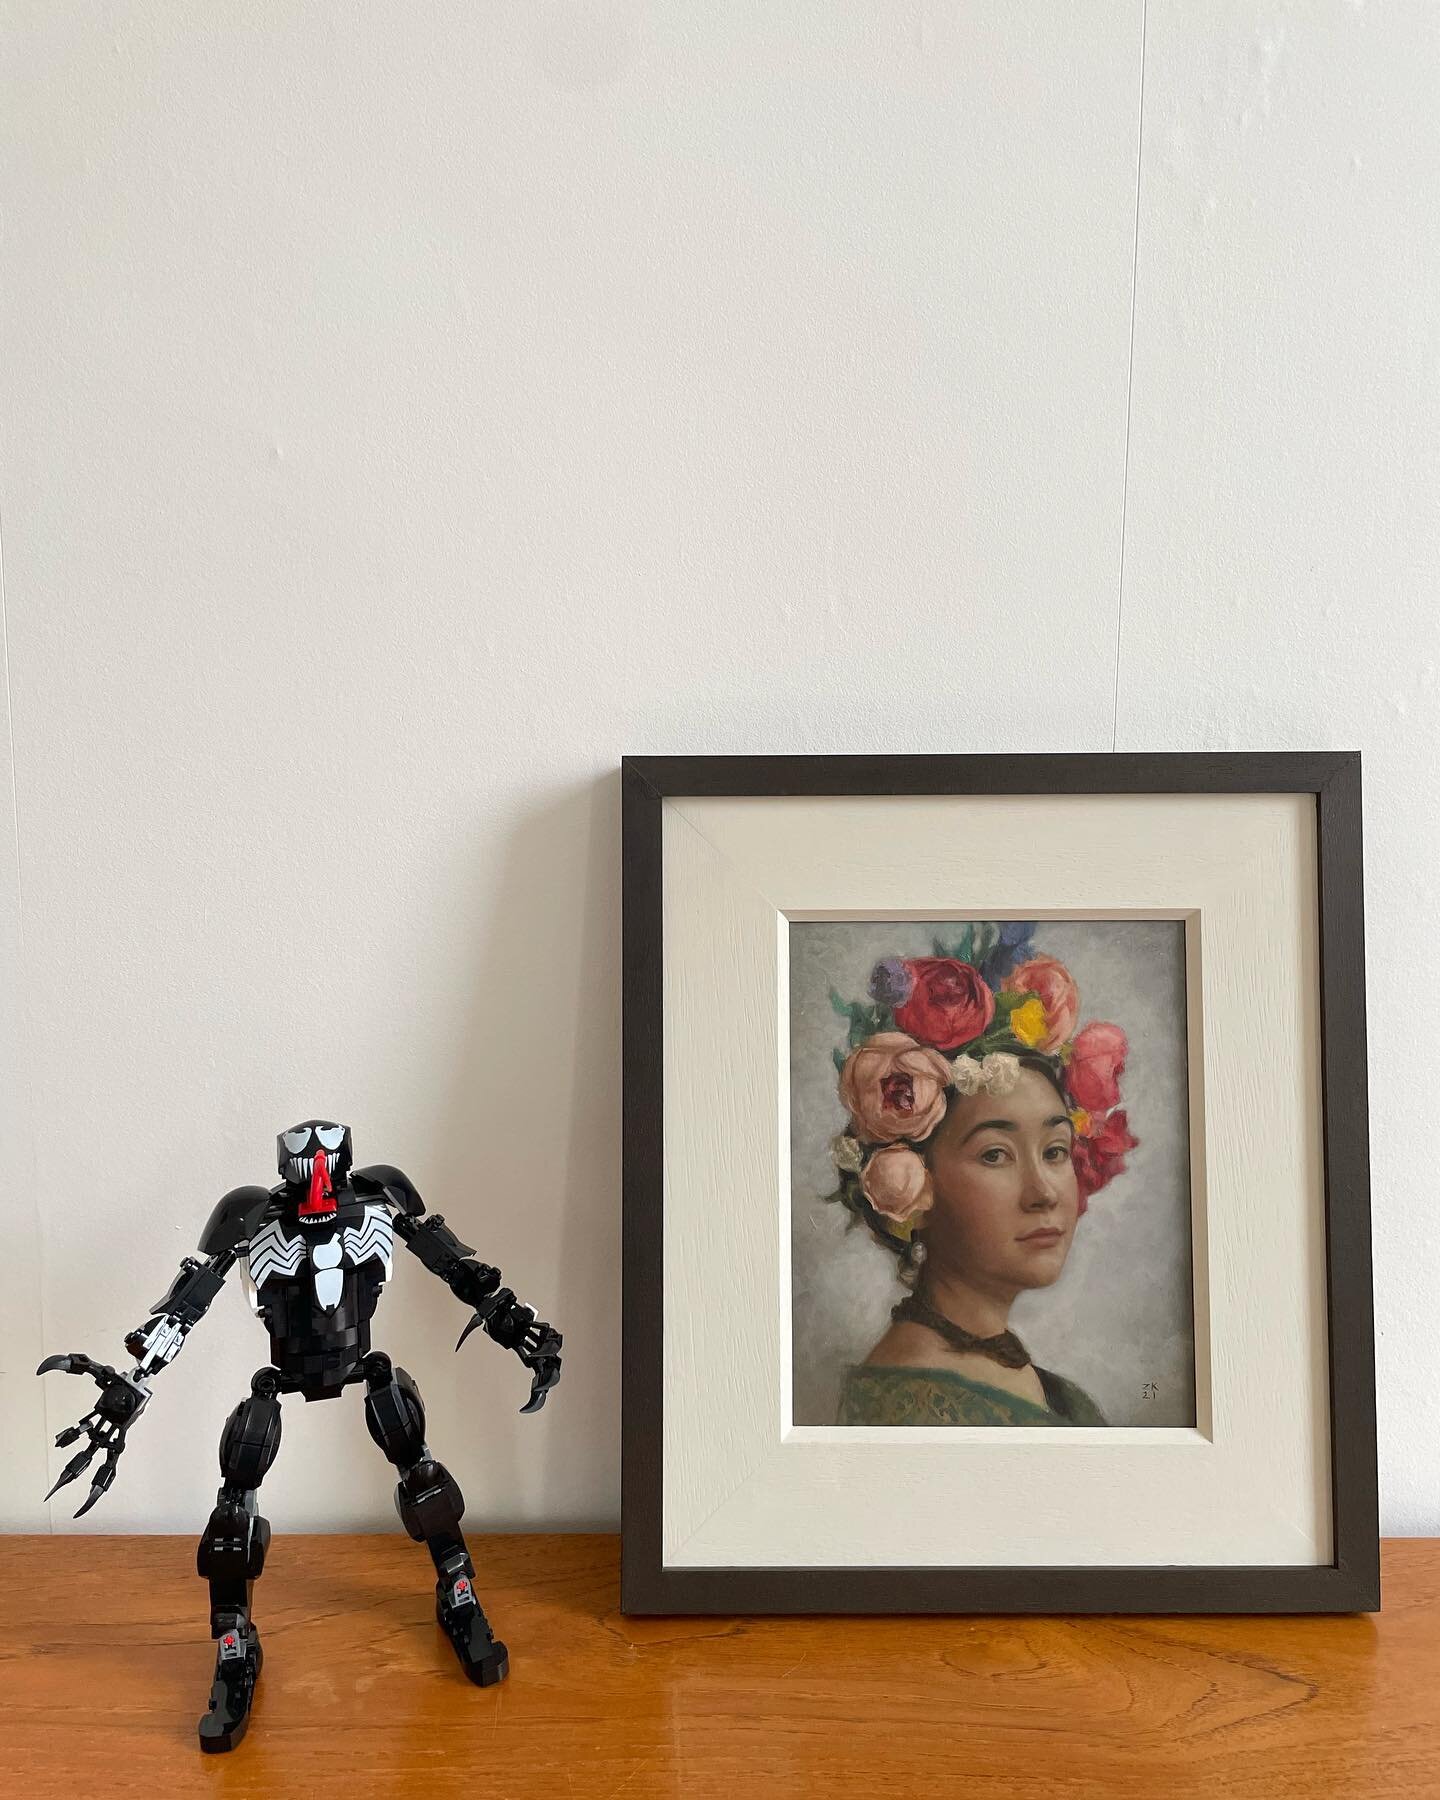 Venom kindly guarding Girl in a Flower Headdress by @zarakuchiart during re-hang! #painting #portaiture #curation #gallerywall